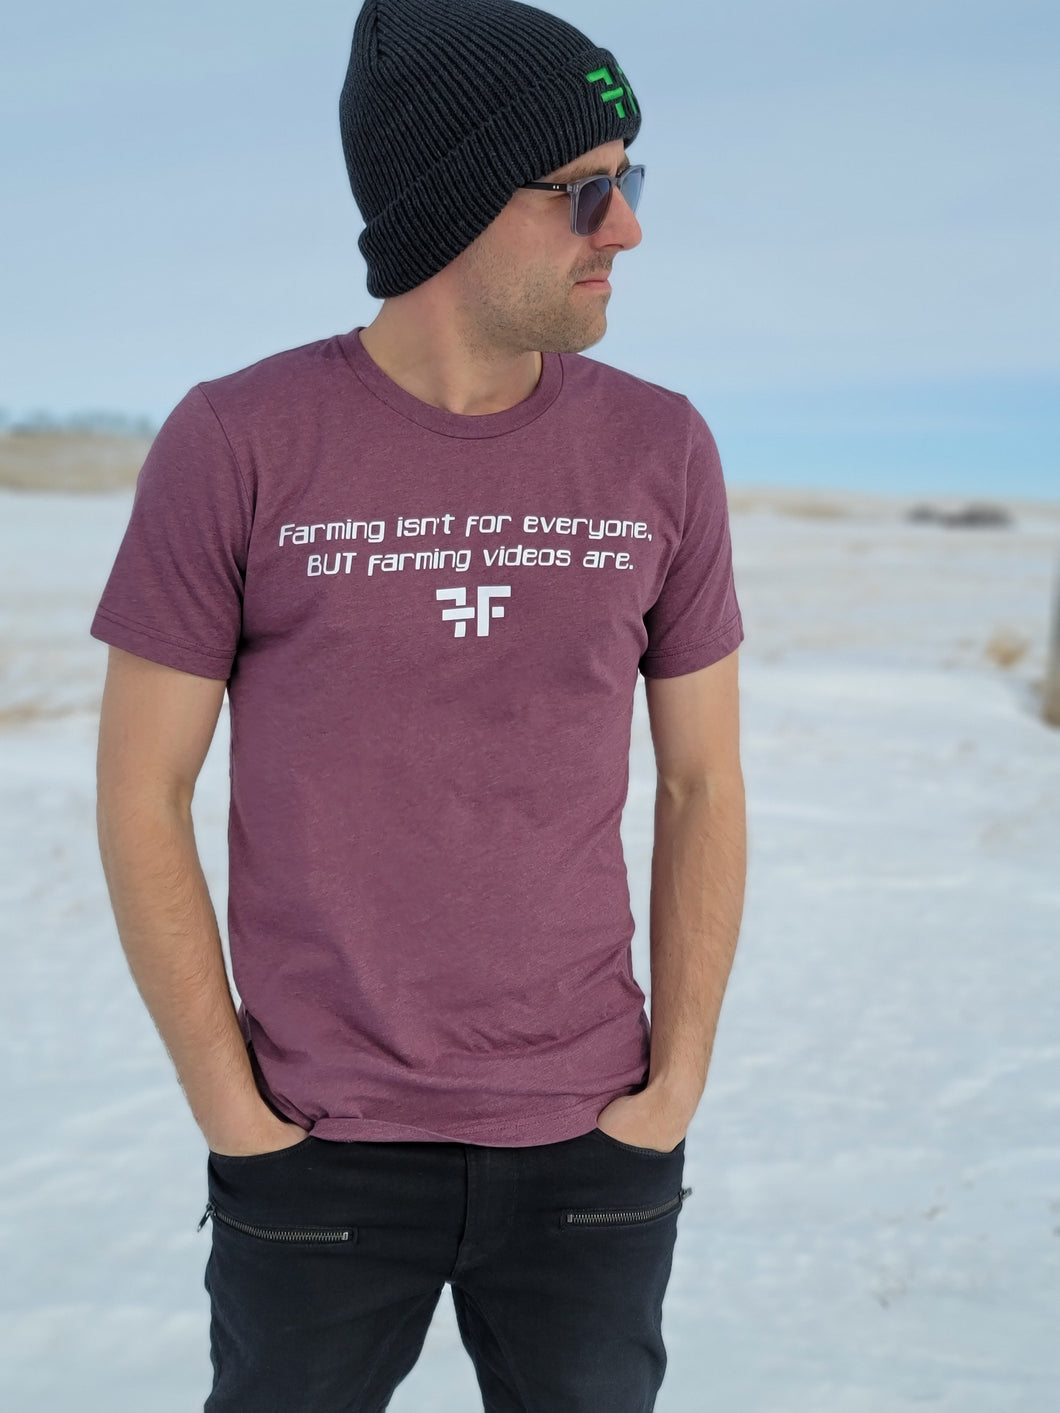 Farming isn't for everyone, but farming videos are! T-Shirt(S &XL left)